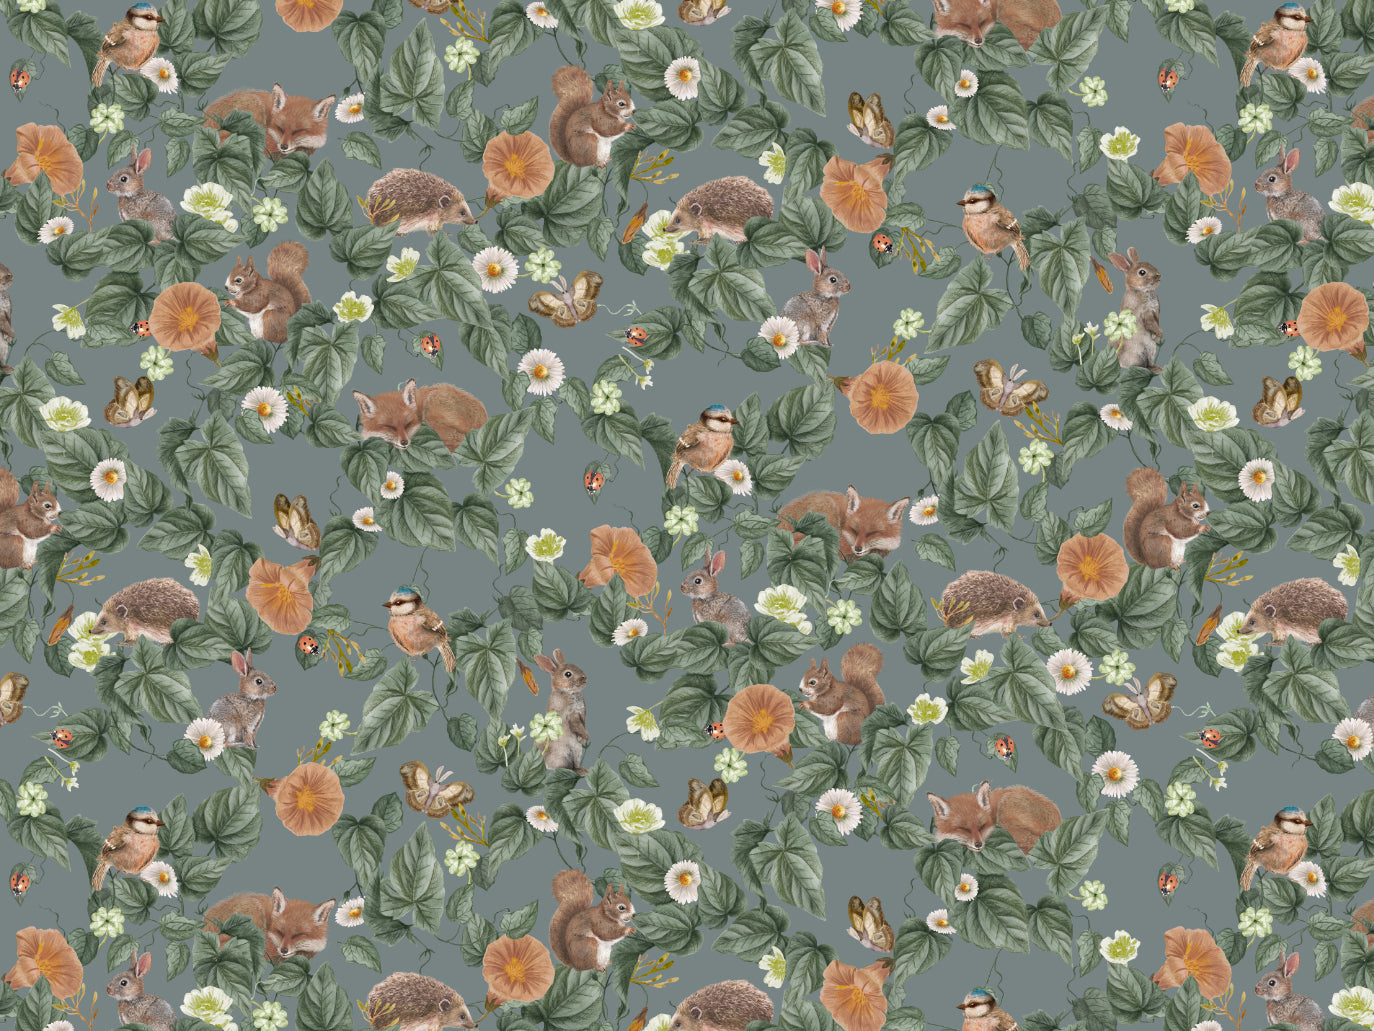 Nursery Wallpaper - Forest Lullaby - Teal